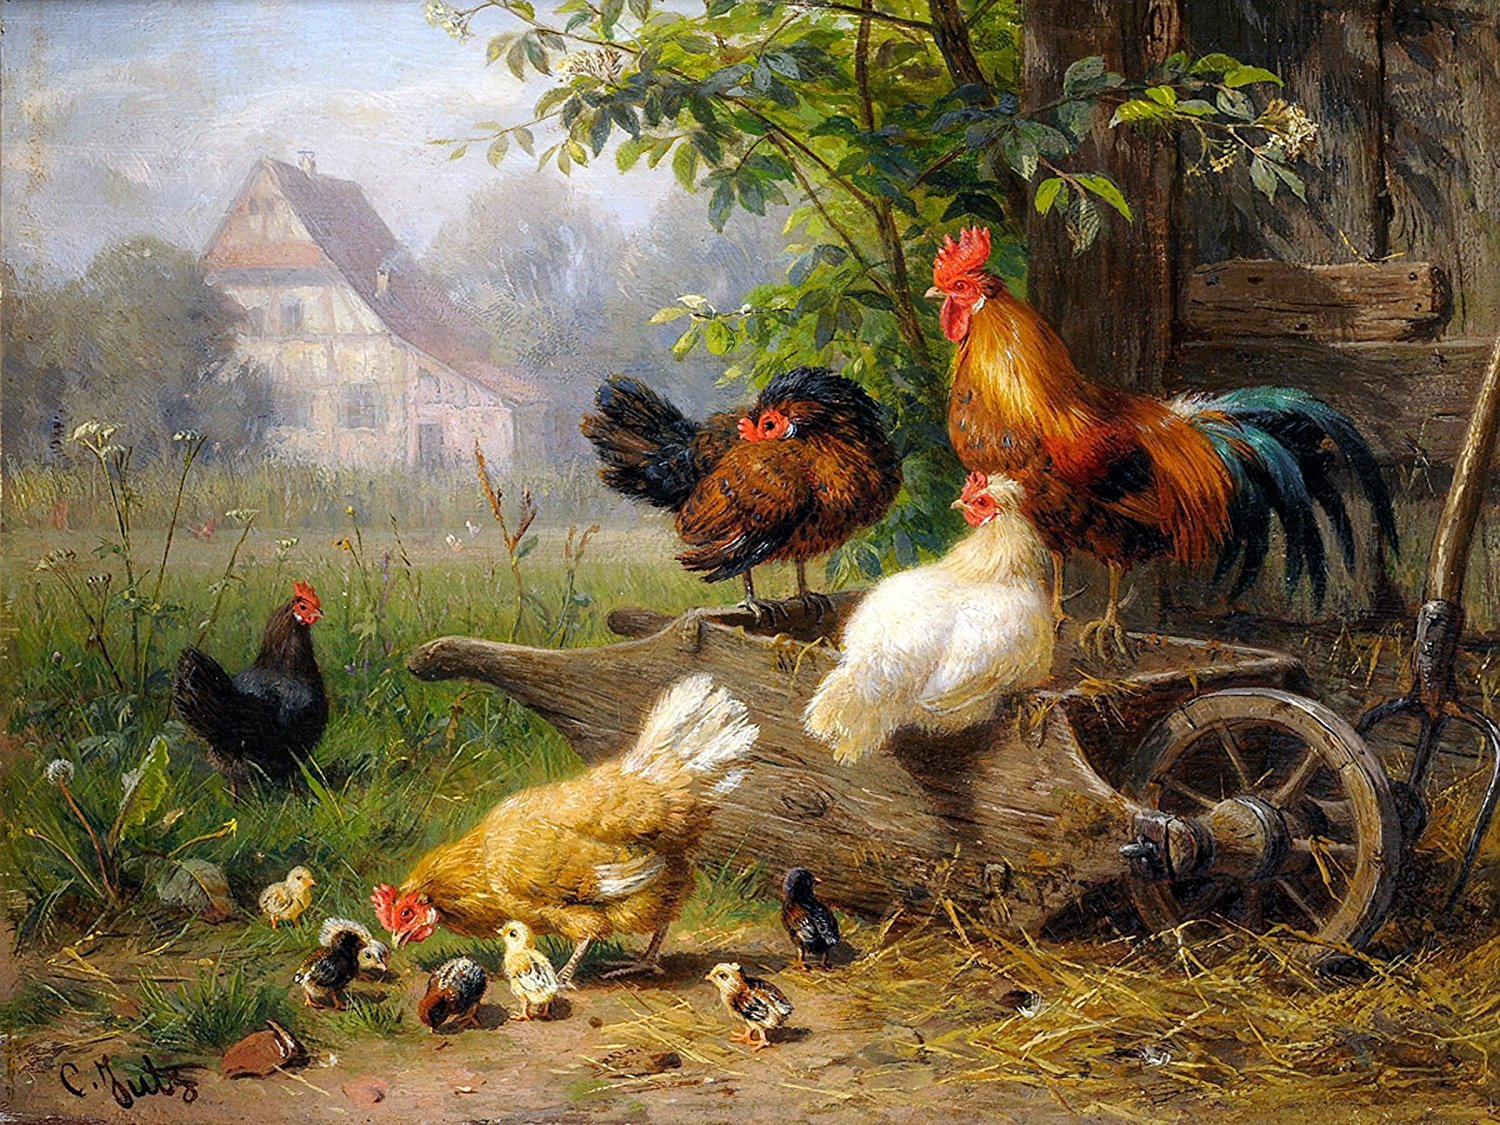 Kitchen Tile Murals For Sale
 Farm rooster chickens by C Jutz Tile Mural Kitchen Wall